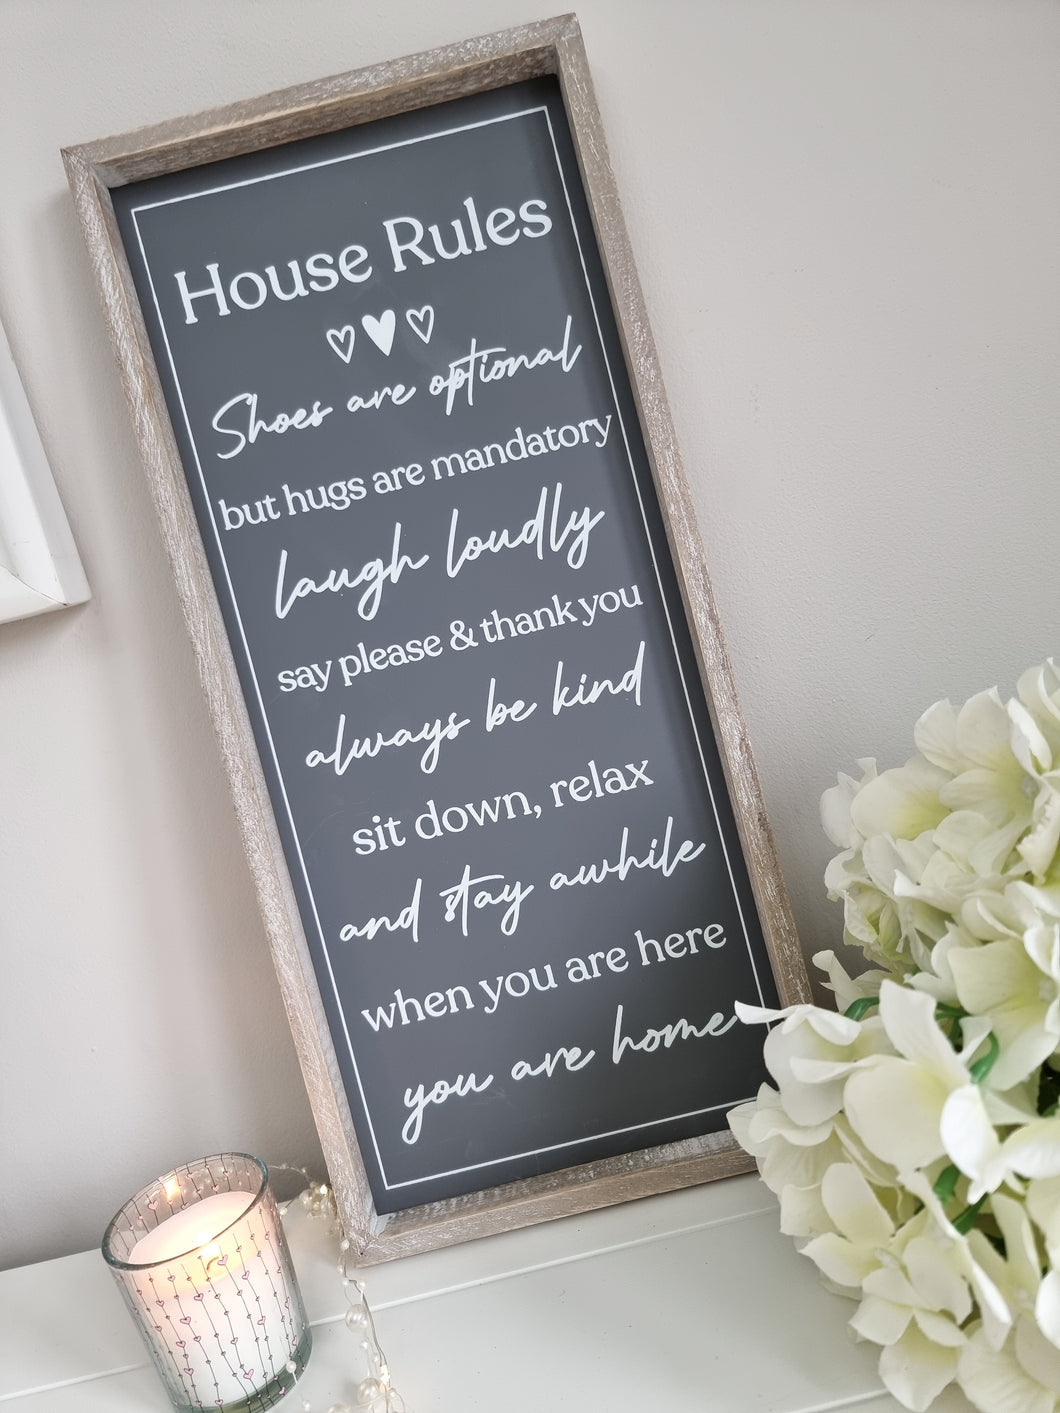 Happy House Rules Framed Wall Plaque